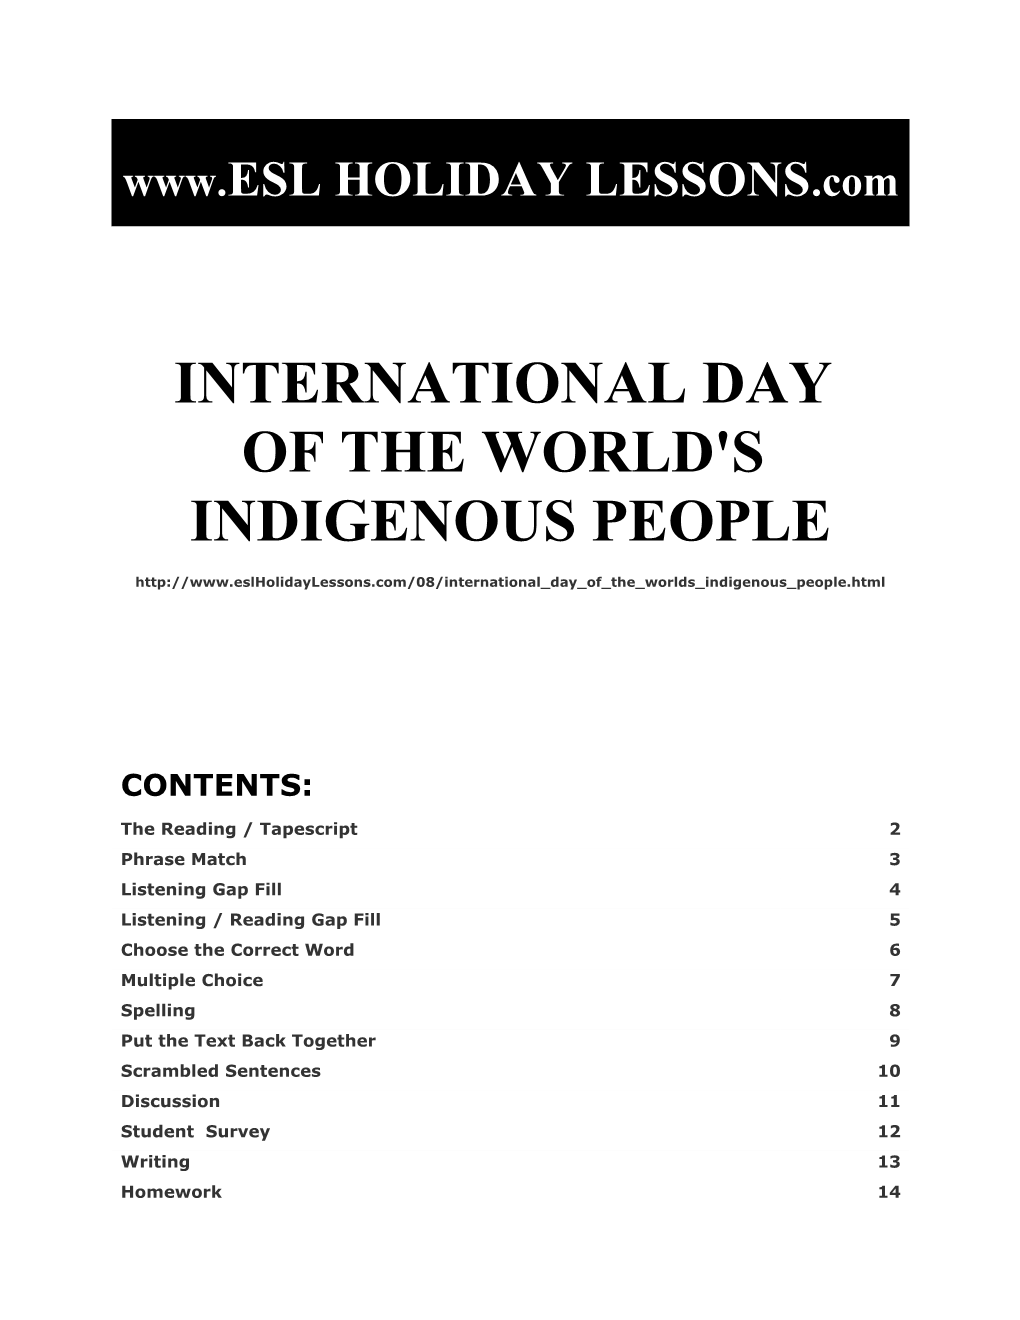 Holiday Lessons - International Day of the World's Indigenous People